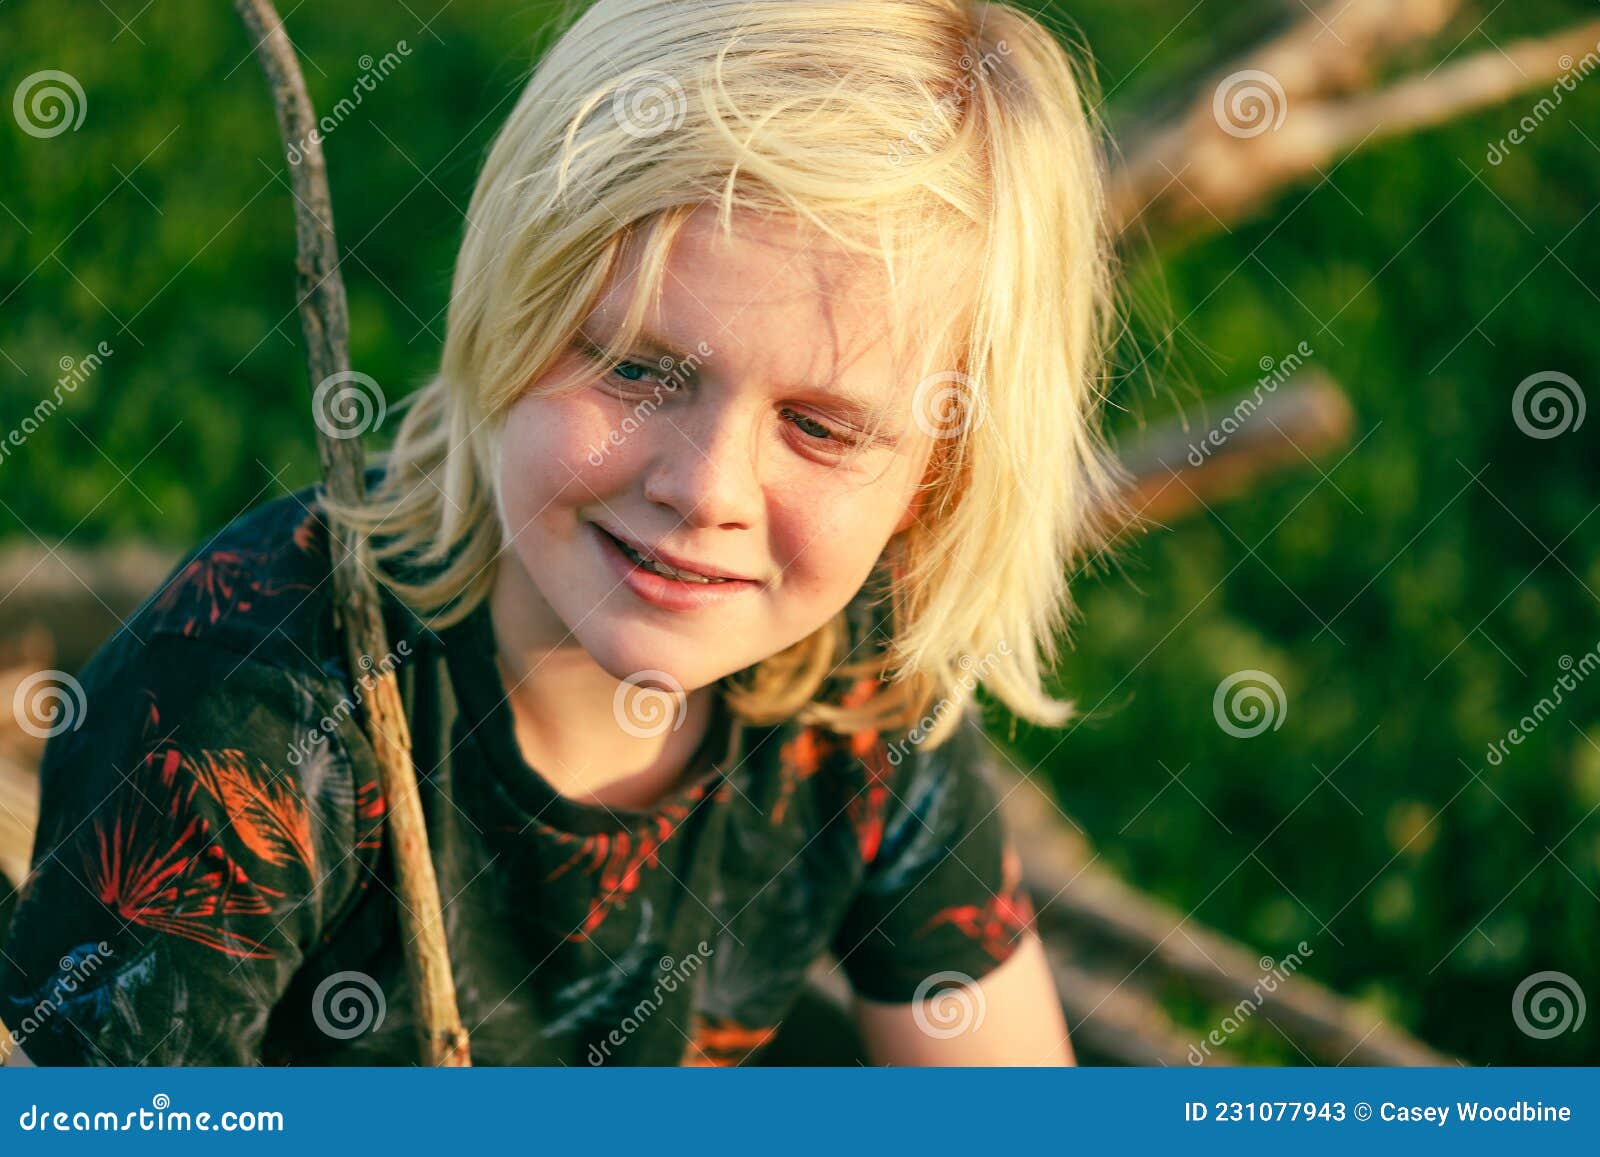 Blonde Hair Boy with Side Part - wide 10